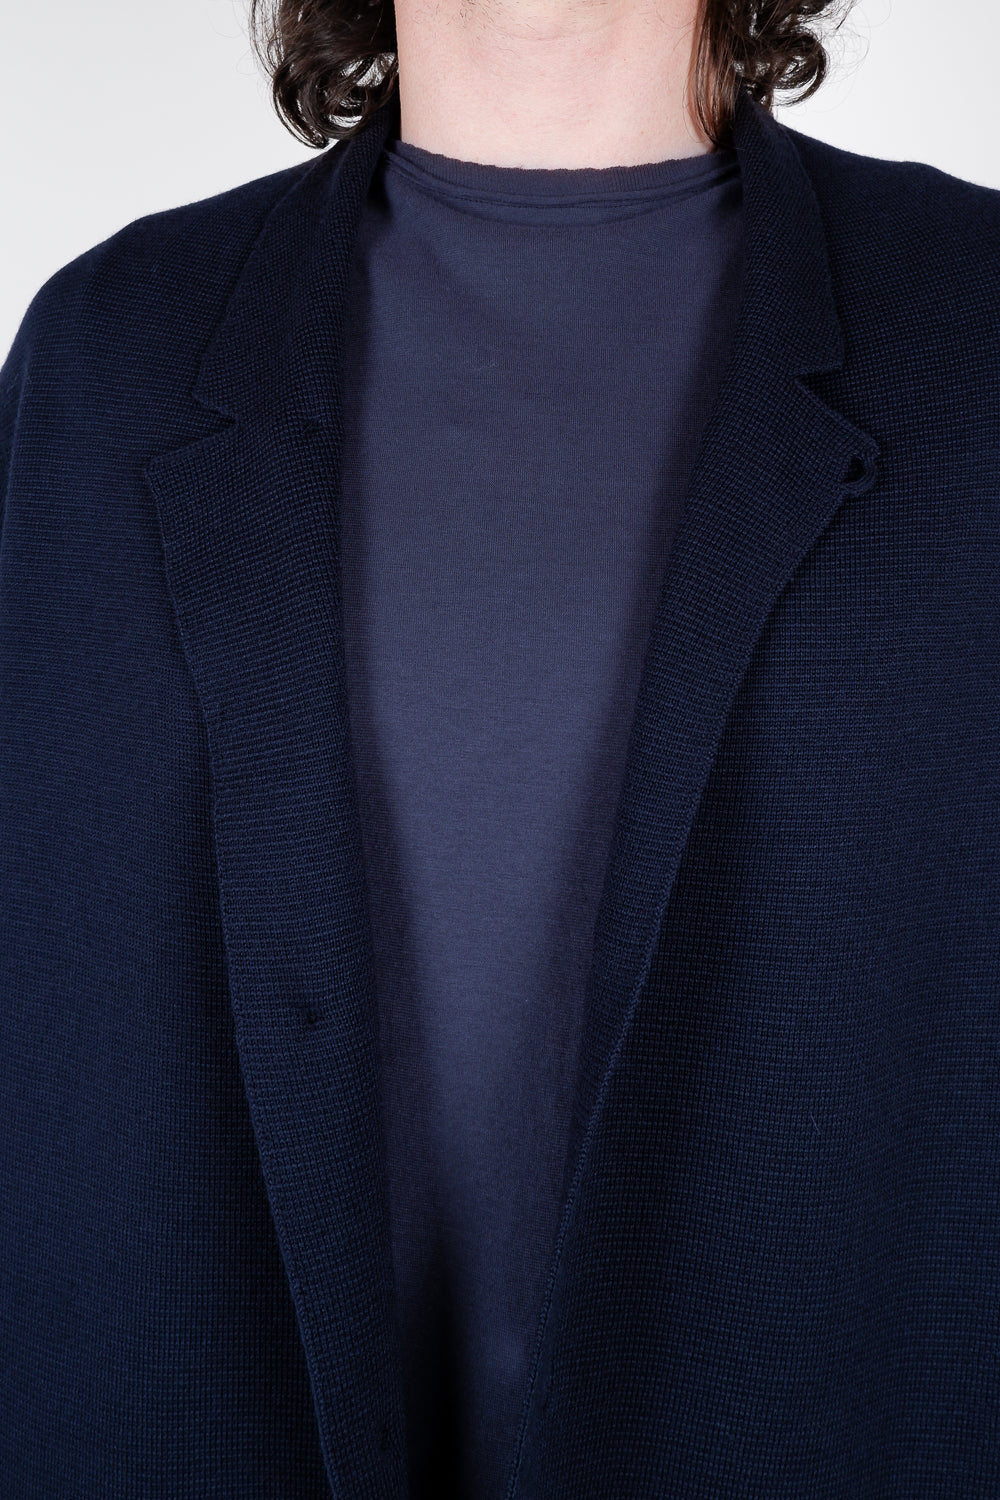 Buy the Hannes Roether Long Button-Up Knitted Cardigan in Navy at Intro. Spend £50 for free UK delivery. Official stockists. We ship worldwide.